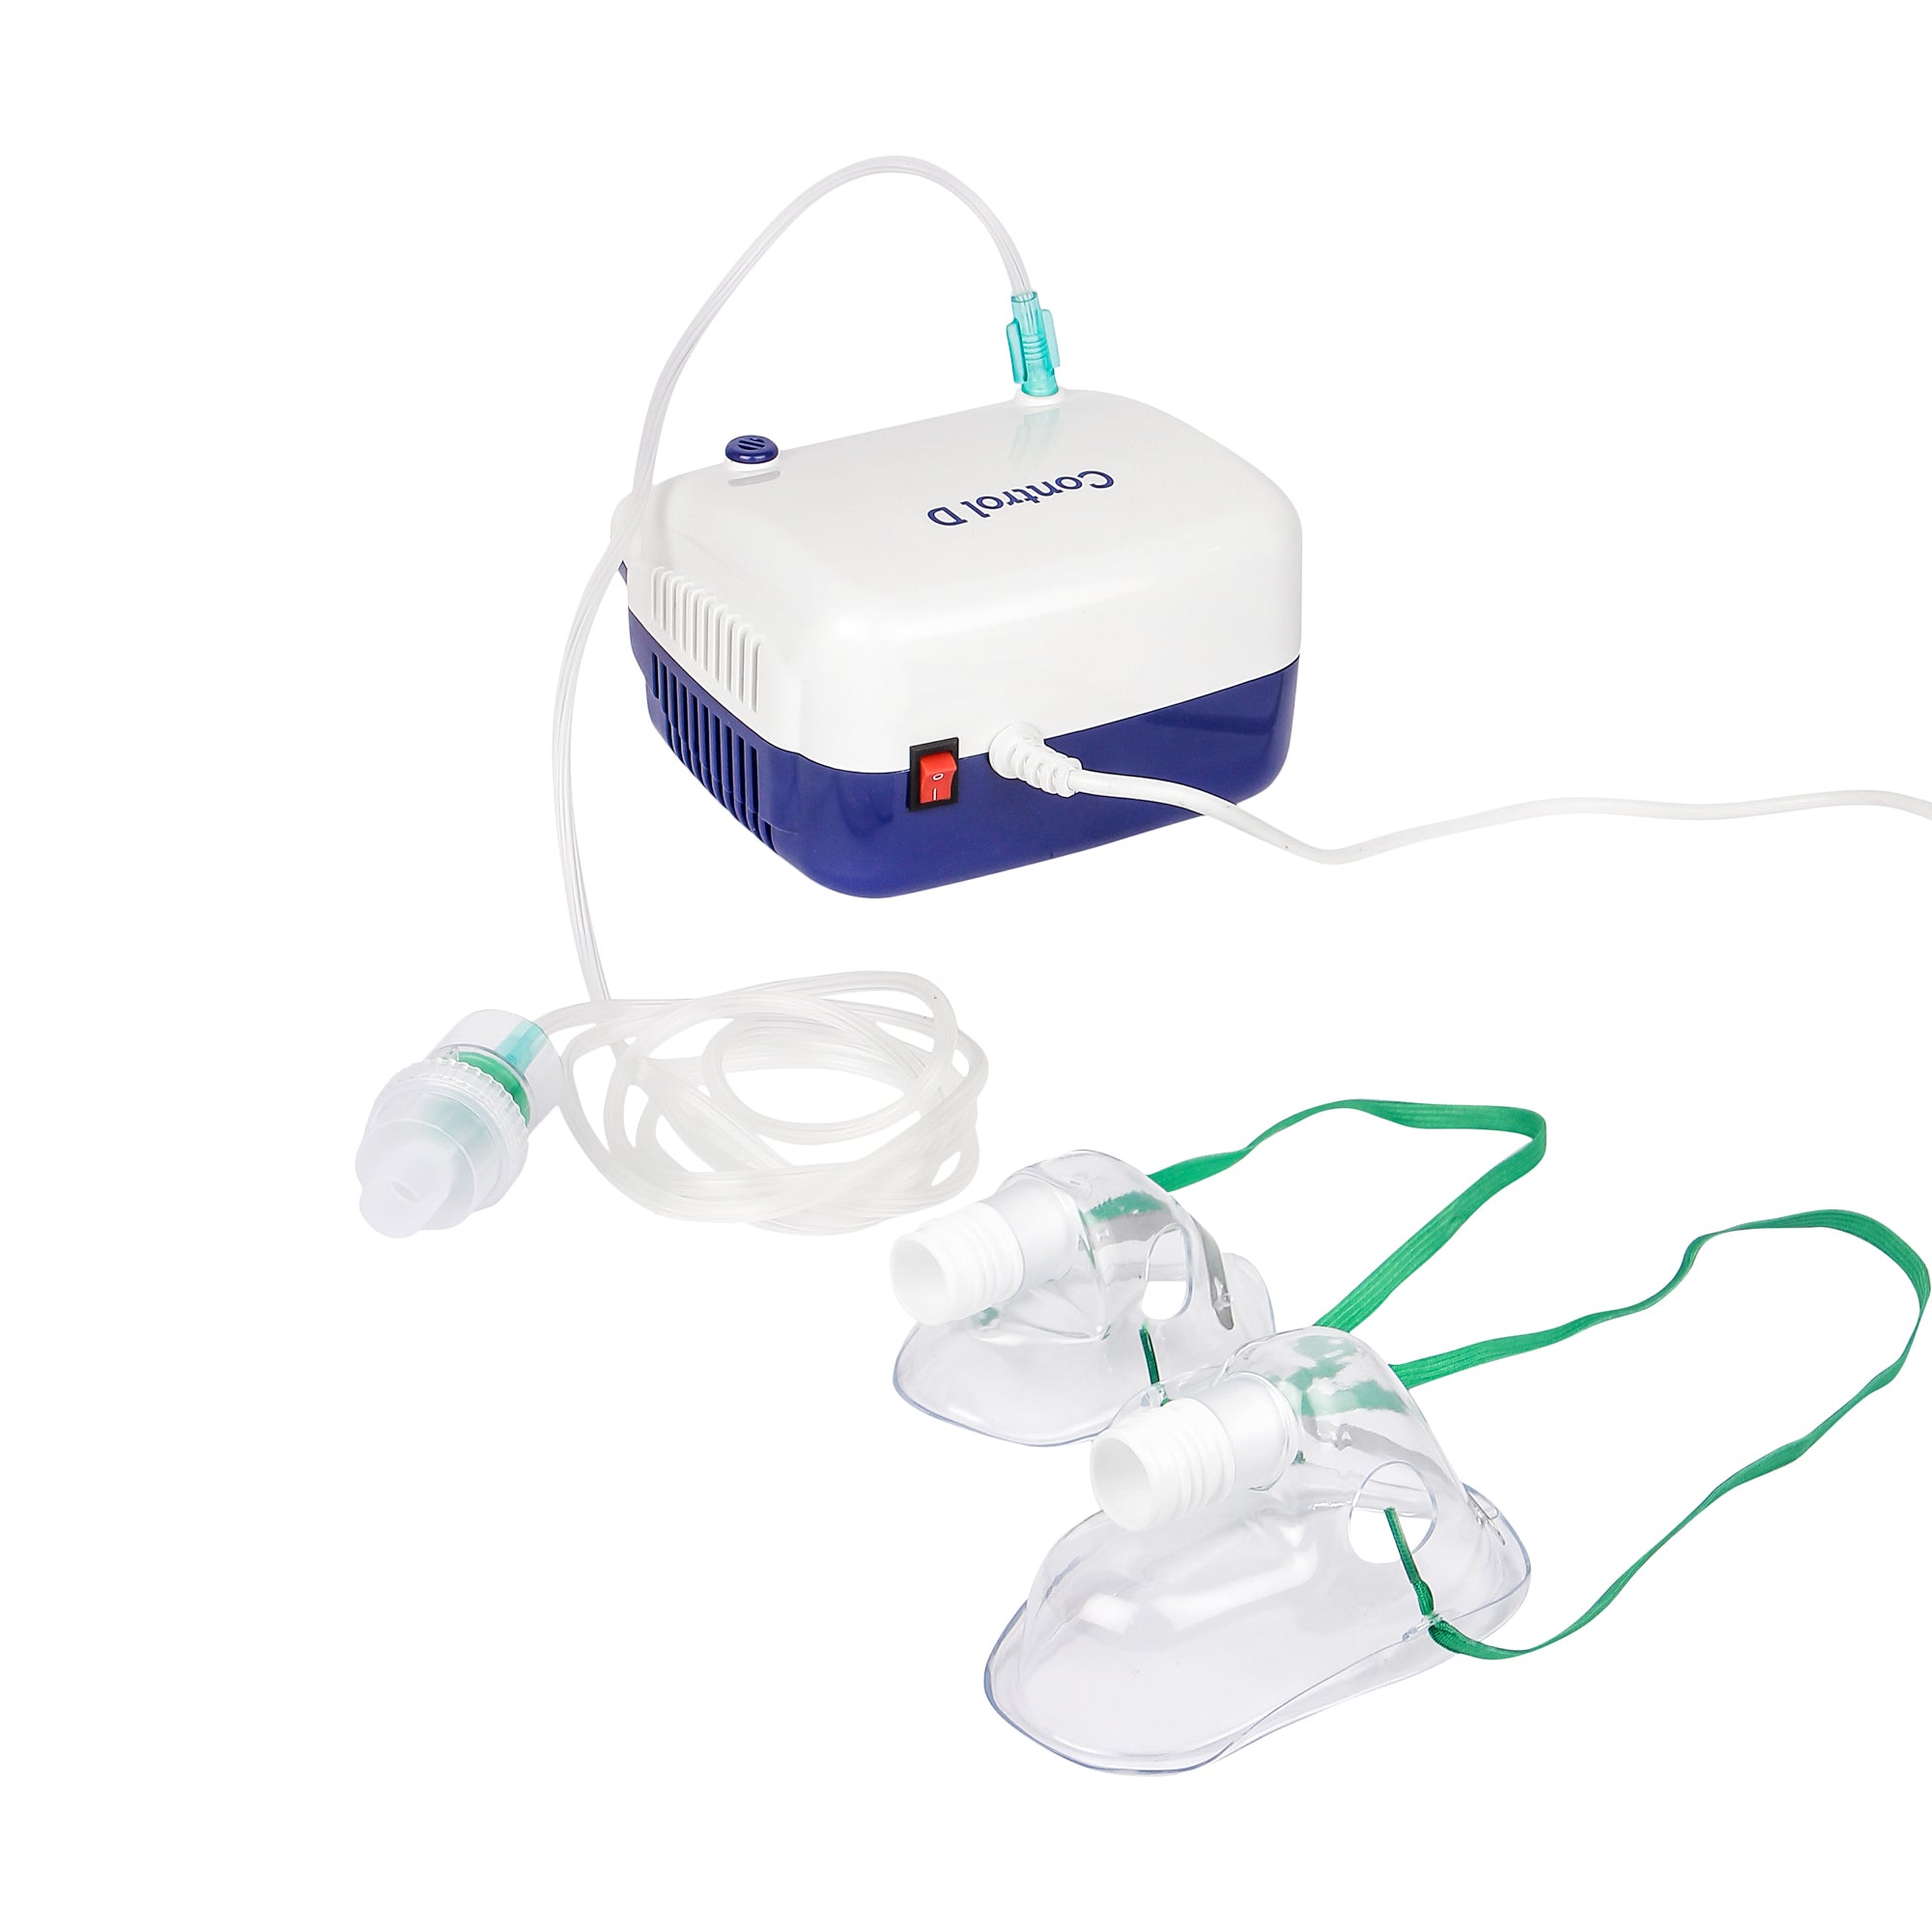 Control D Compressor Complete Kit with Child and Adult Masks Blue & White Nebulizer